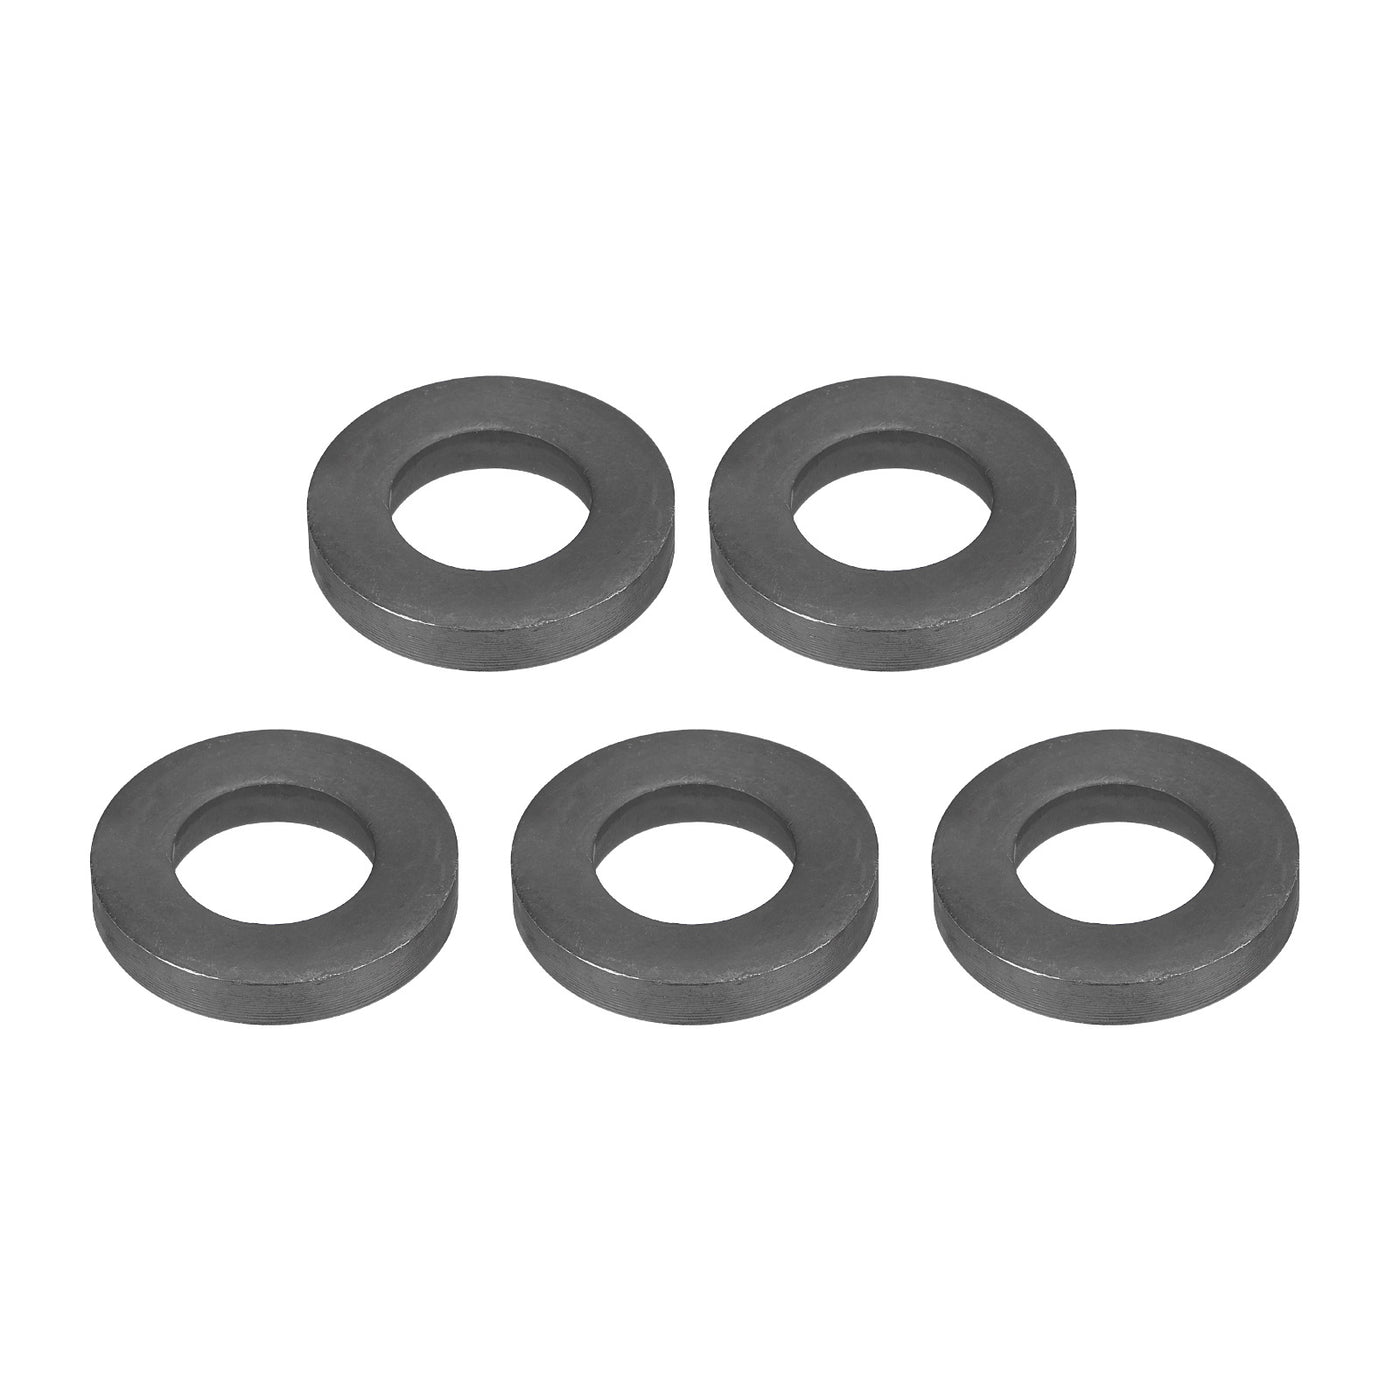 uxcell Uxcell M18 Carbon Steel Flat Washer 5pcs 19x33x6mm Grade 8.8 Alloy Steel Fasteners